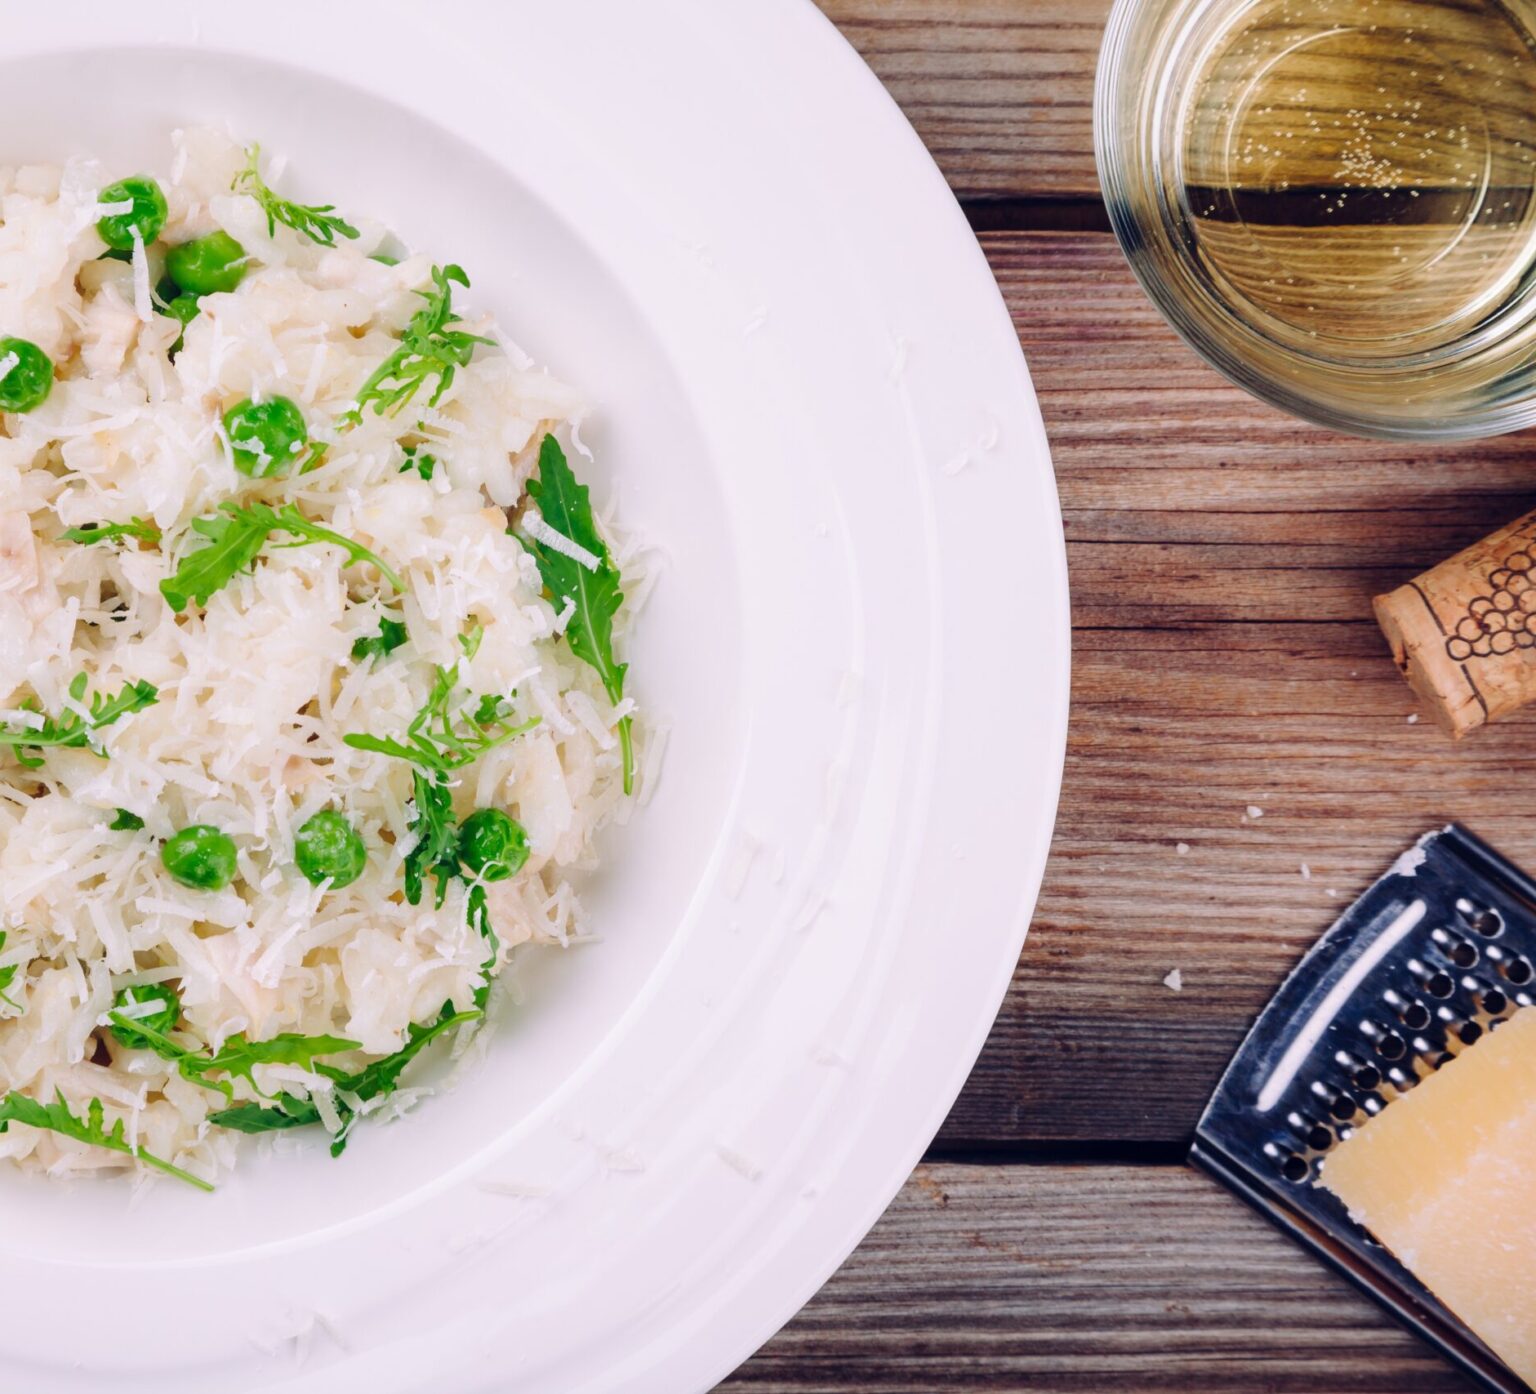 Homemade risotto with chicken, green peas, arugula and parmesan. top view